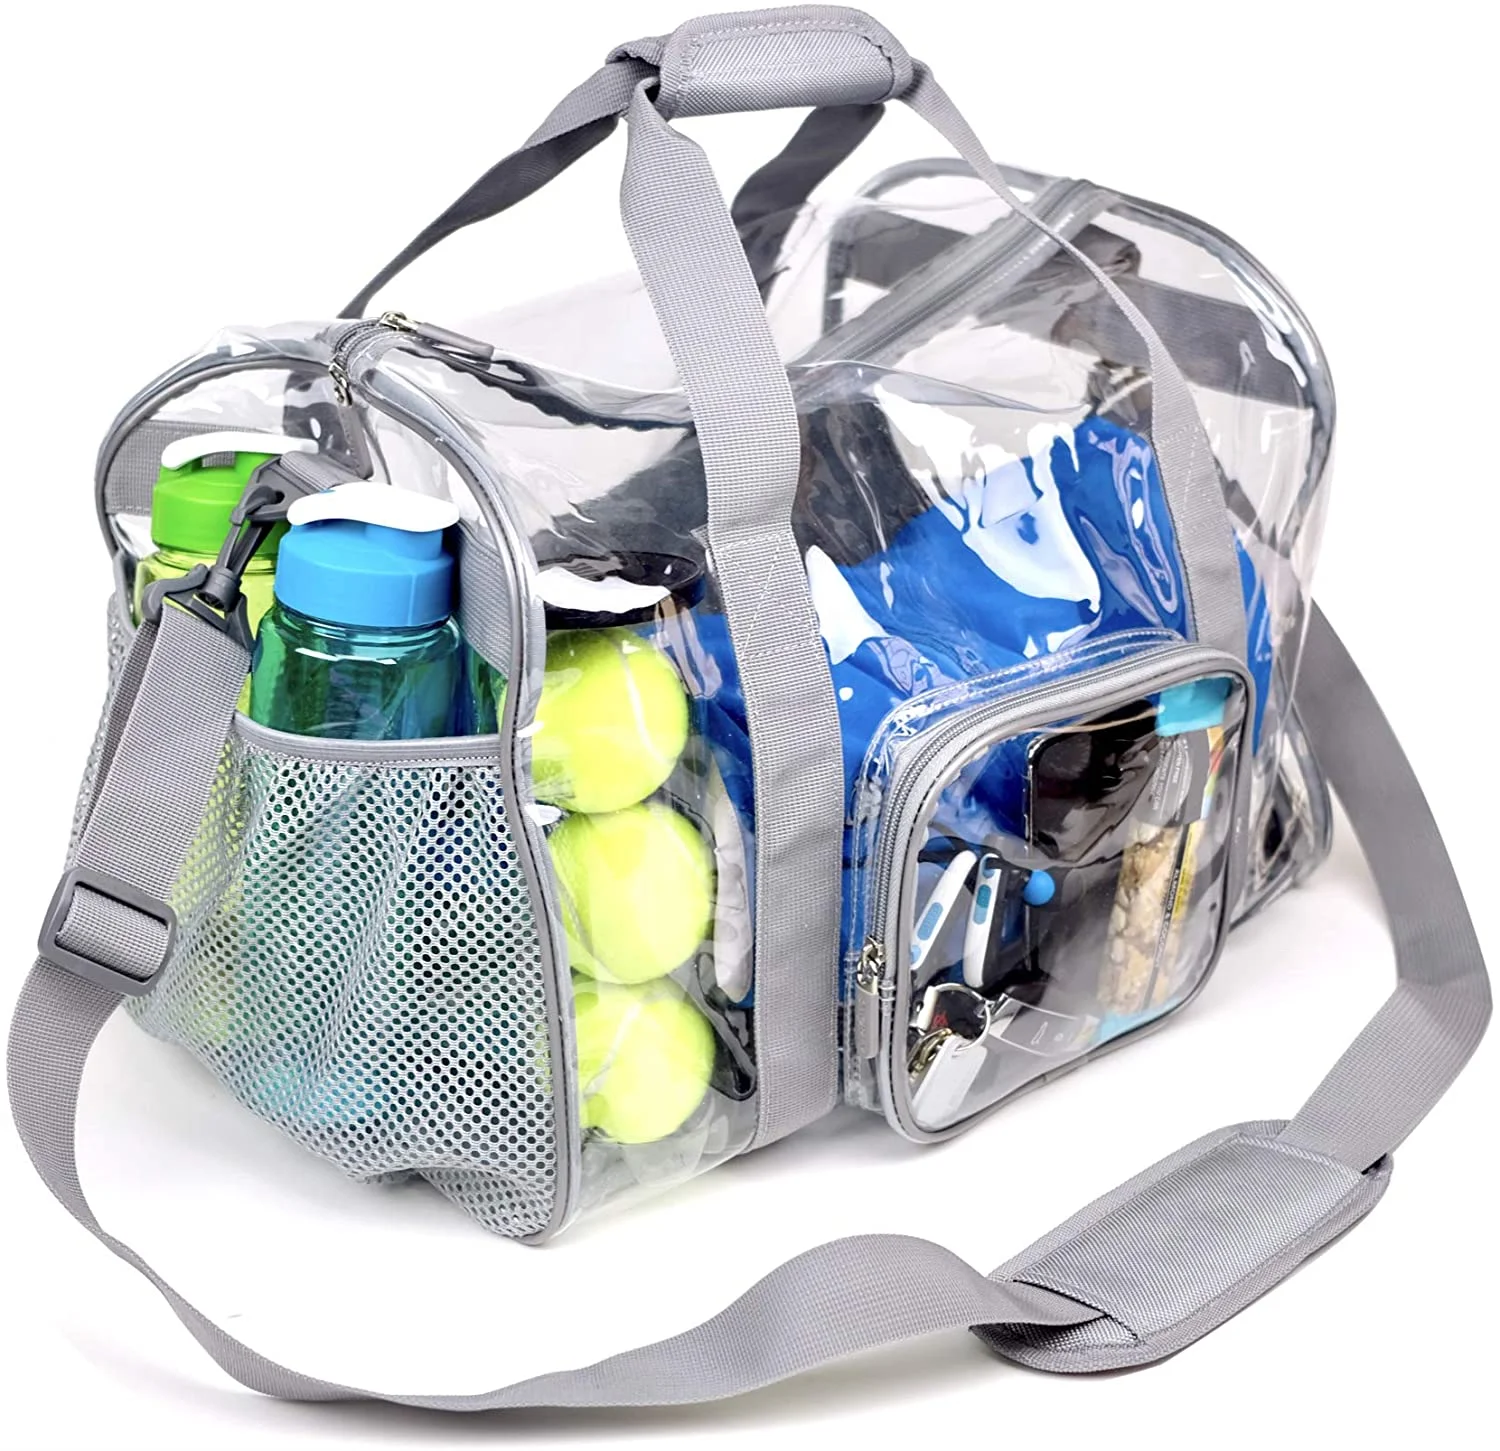 Clear Two-way Zipper Duffle Sport Bag with/ Removable Shoulder Strap